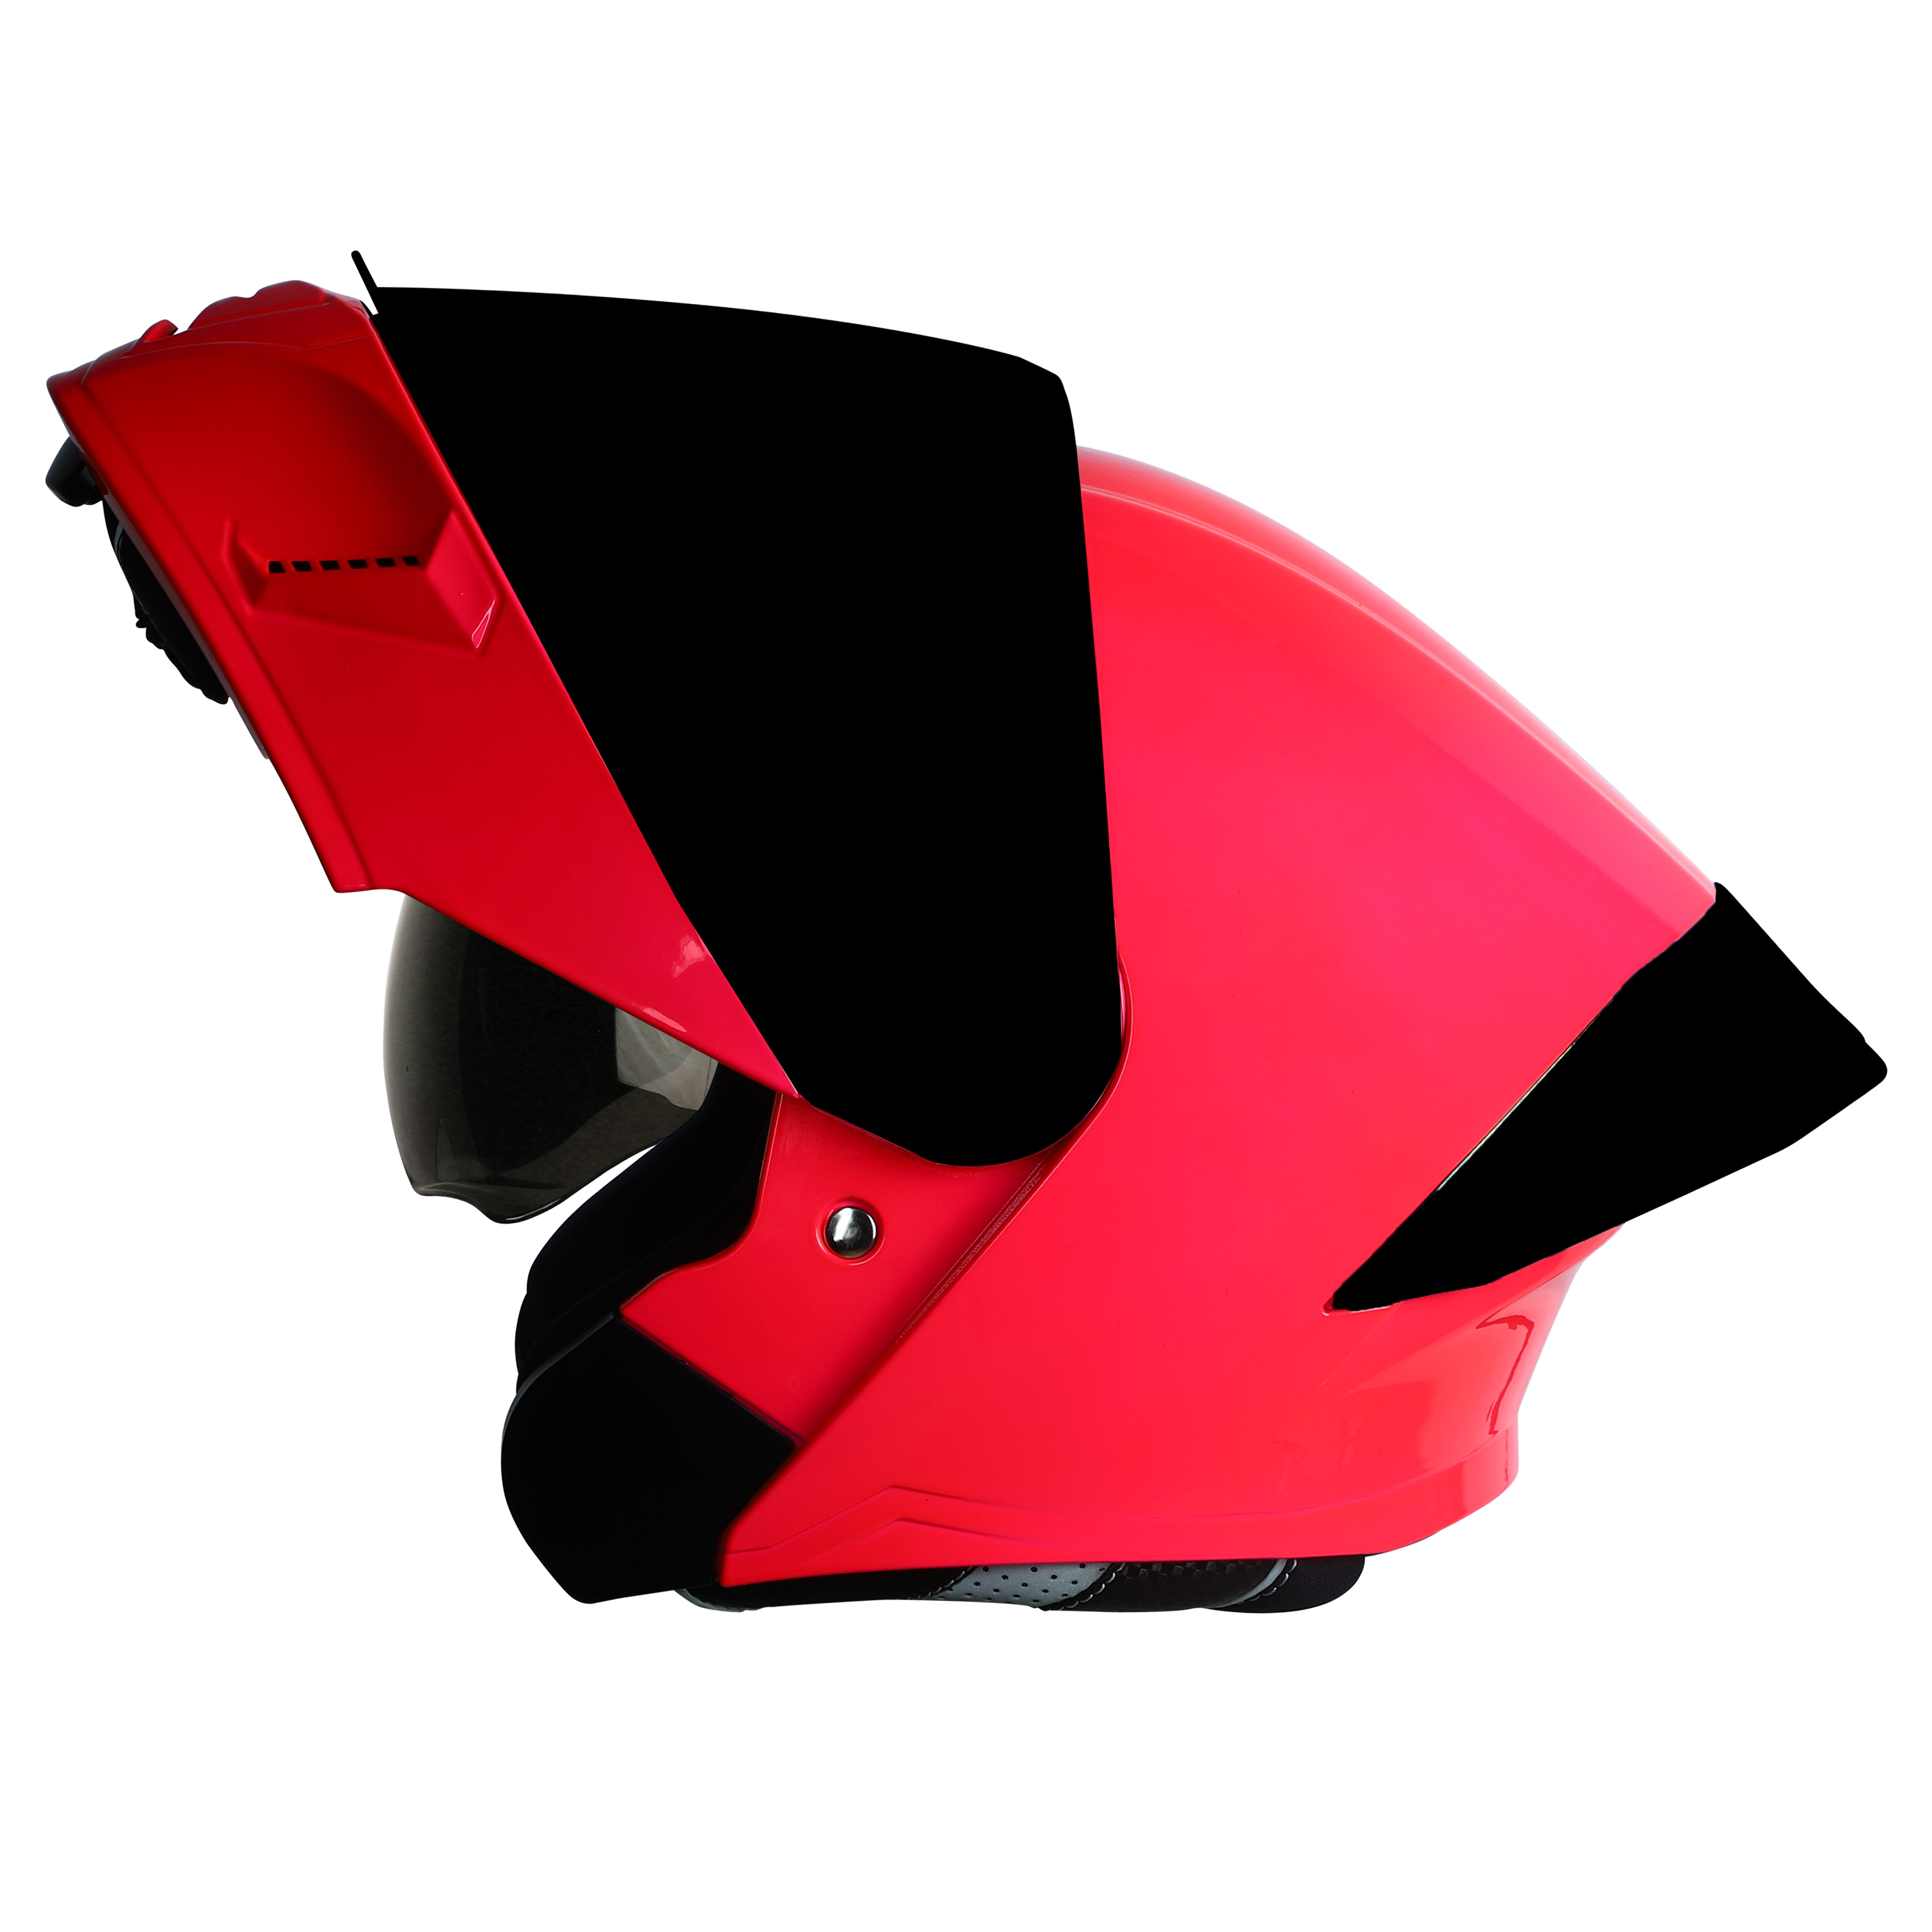 Steelbird SBA-20 7Wings ISI Certified Flip-Up Helmet With Black Spoiler For Men And Women With Inner Smoke Sun Shield (Glossy Fluo Watermelon With Smoke Visor)